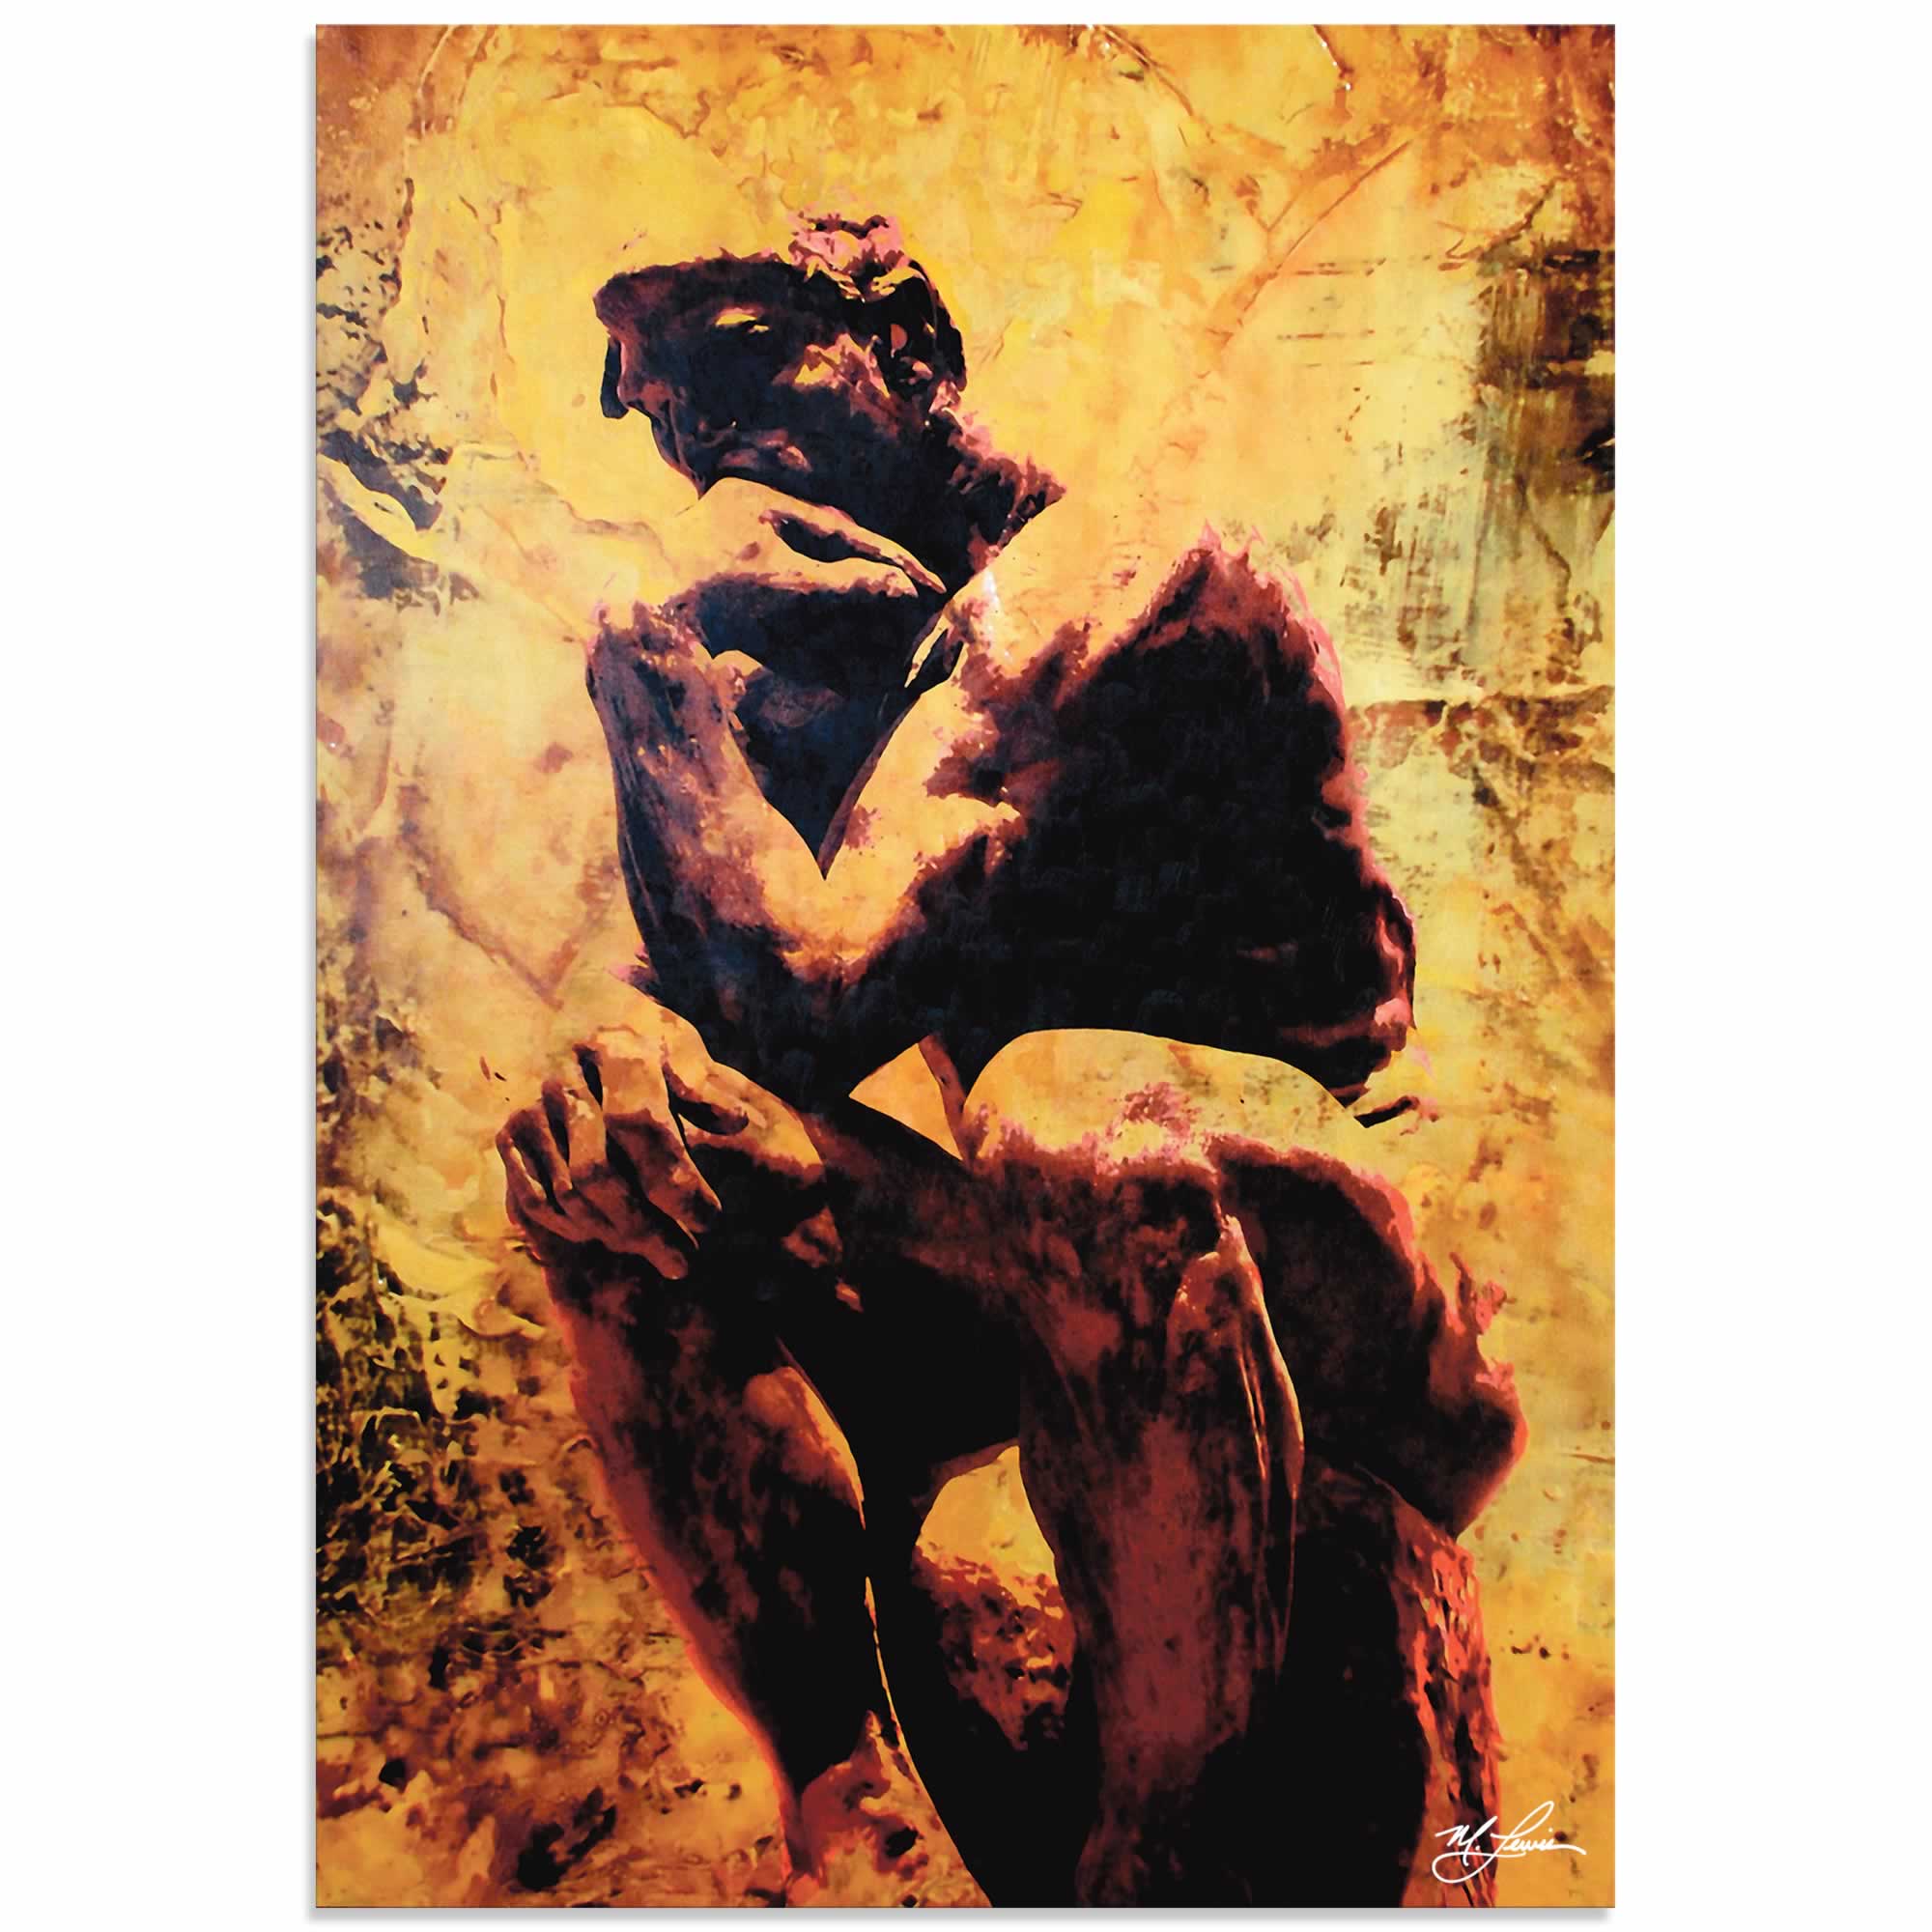 Mark Lewis 'Rodin Clarified Thought' Limited Edition Pop Art Print on Metal or Acrylic